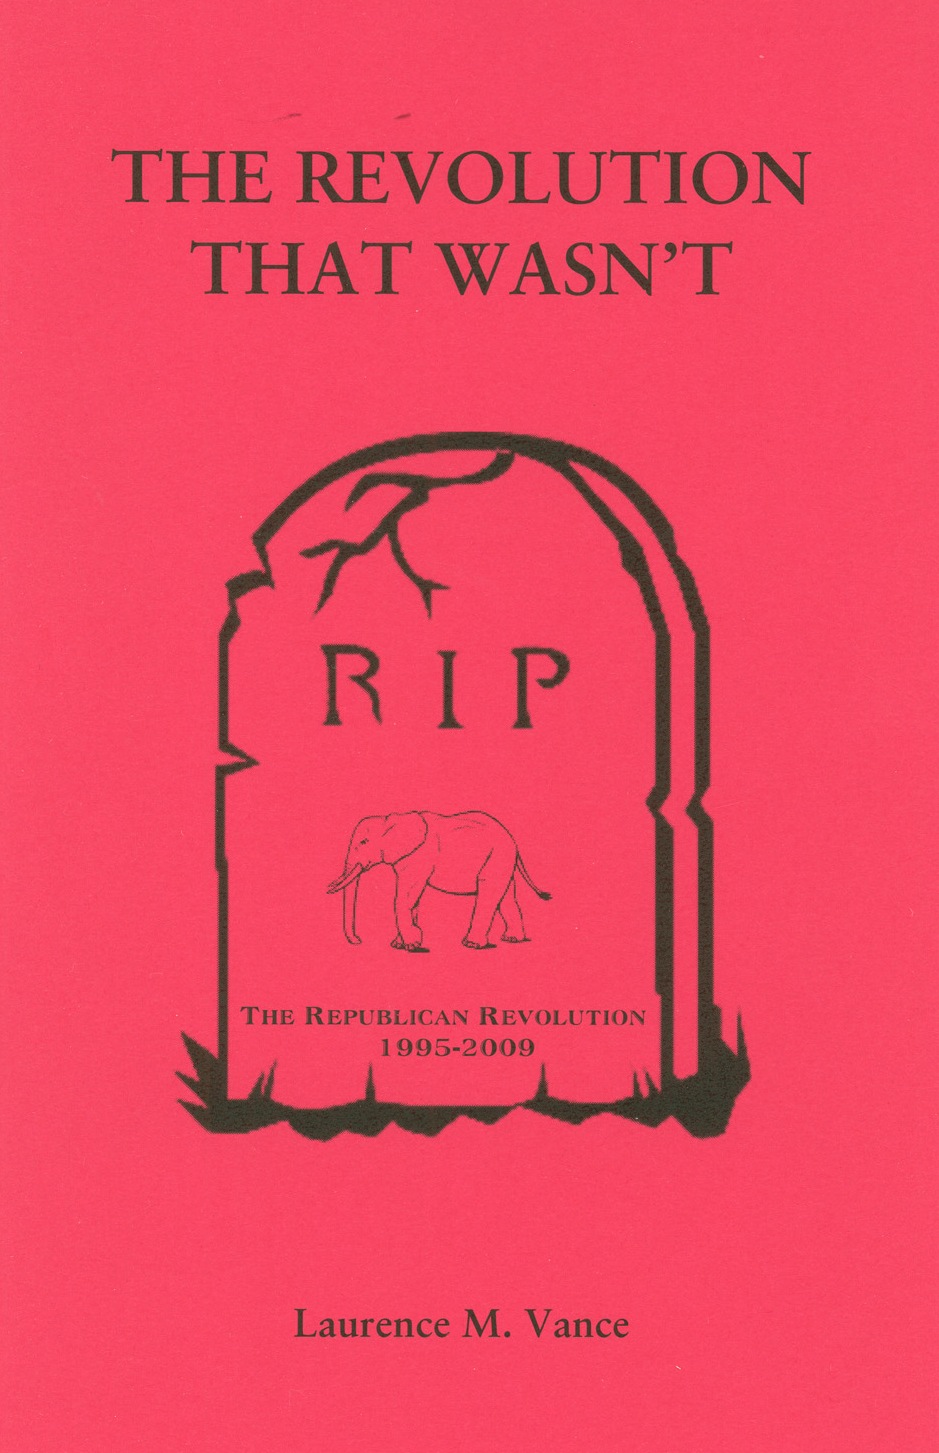 The Revolution that Wasn't, 36 pages, booklet, $5.95